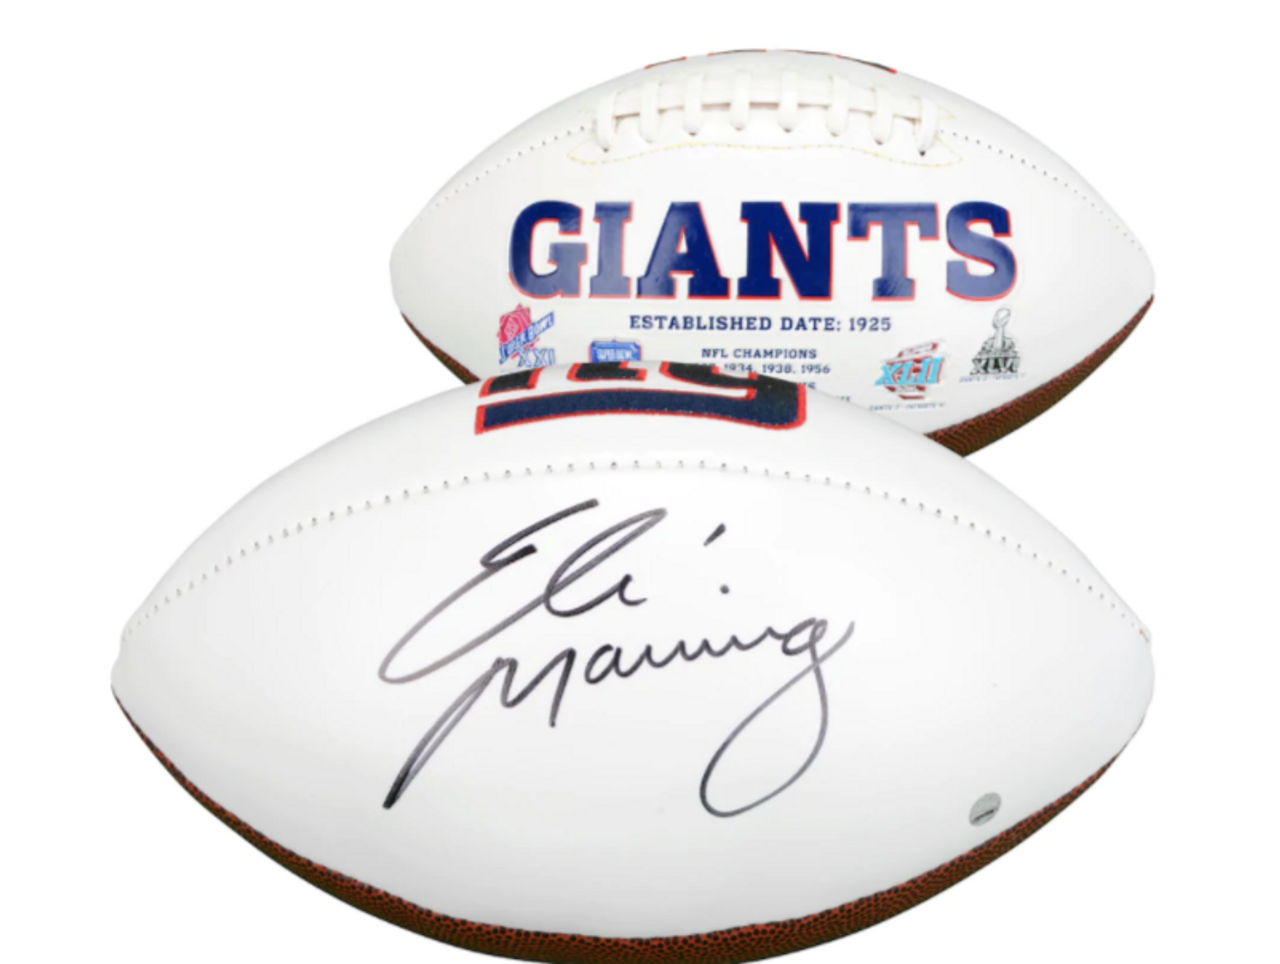 Official New York Giants Collectibles, Autographed Merchandise